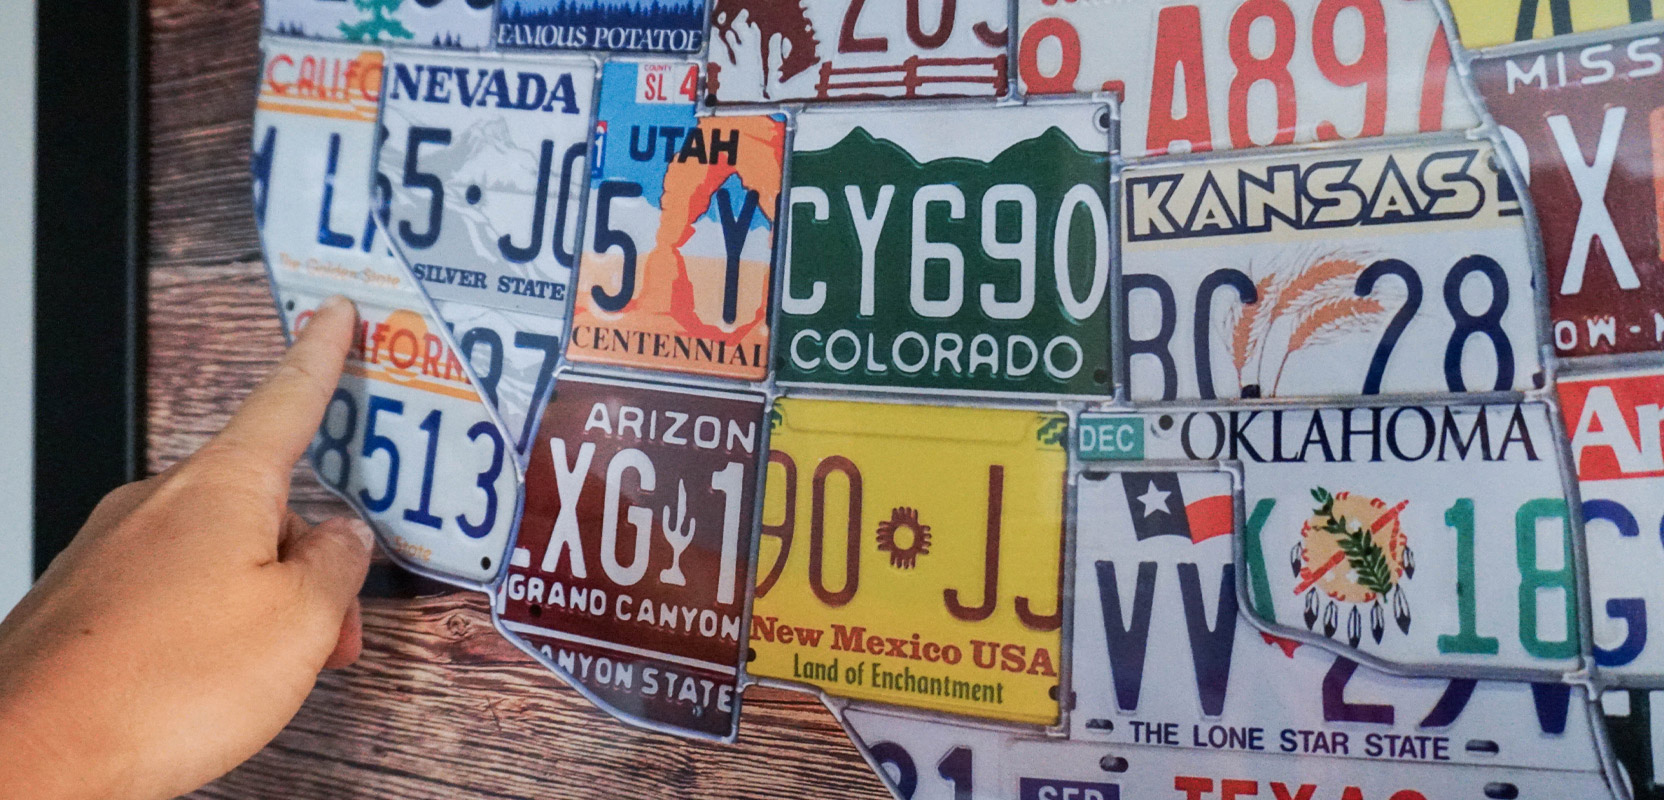 License plates in the shape of a map of the USA